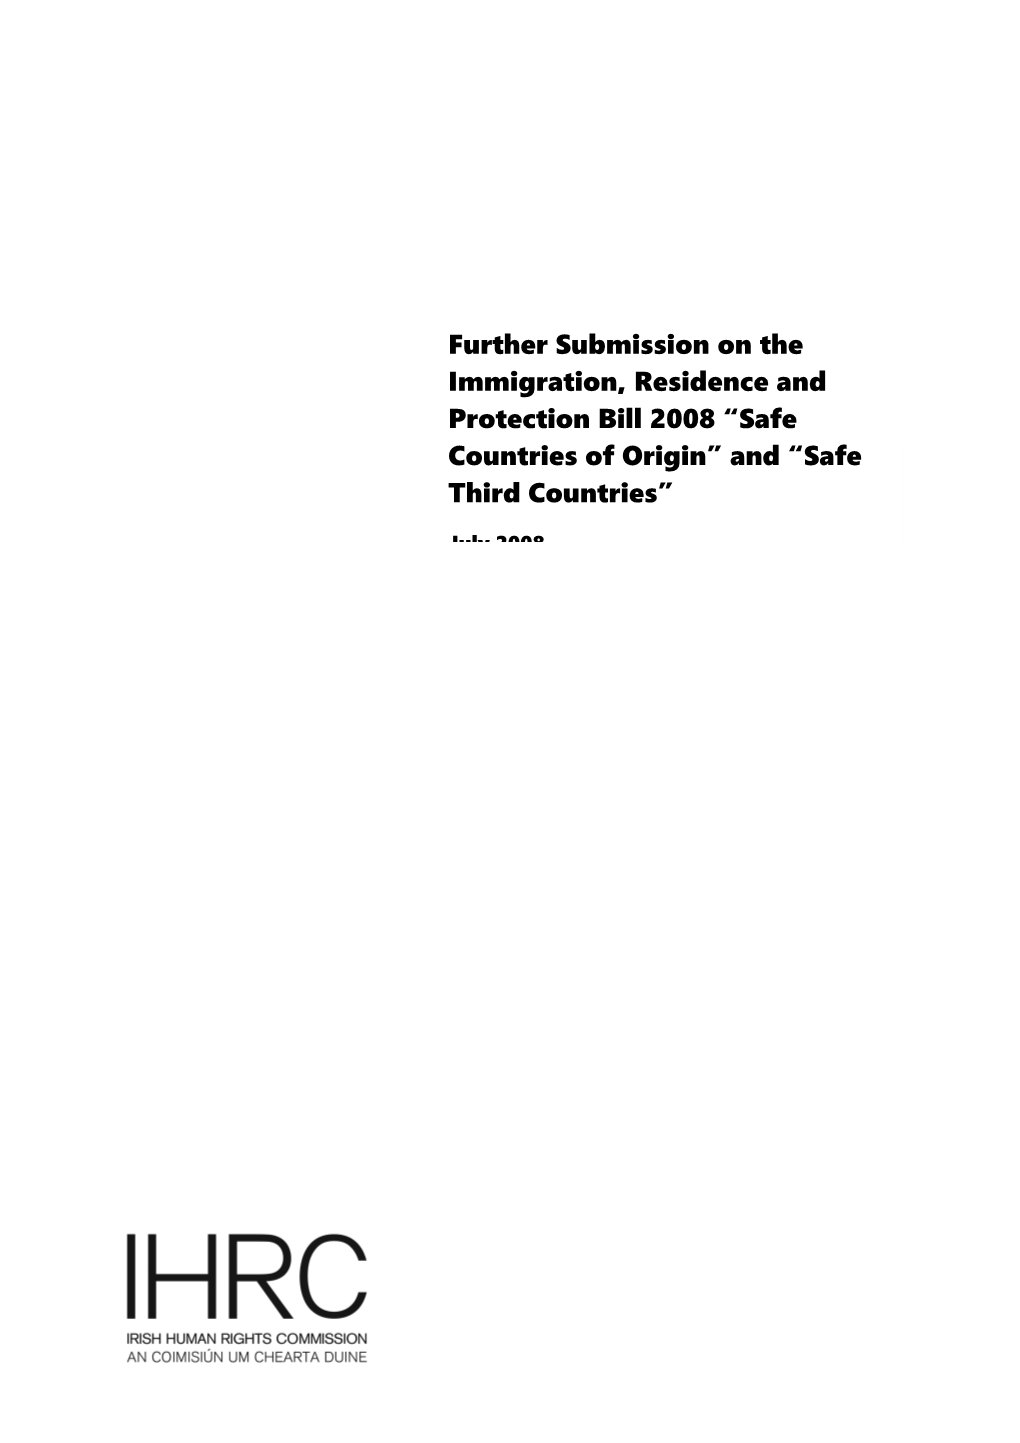 IHRC Further Submission in Relation to the Immigration, Residence and Protection Bill 2008